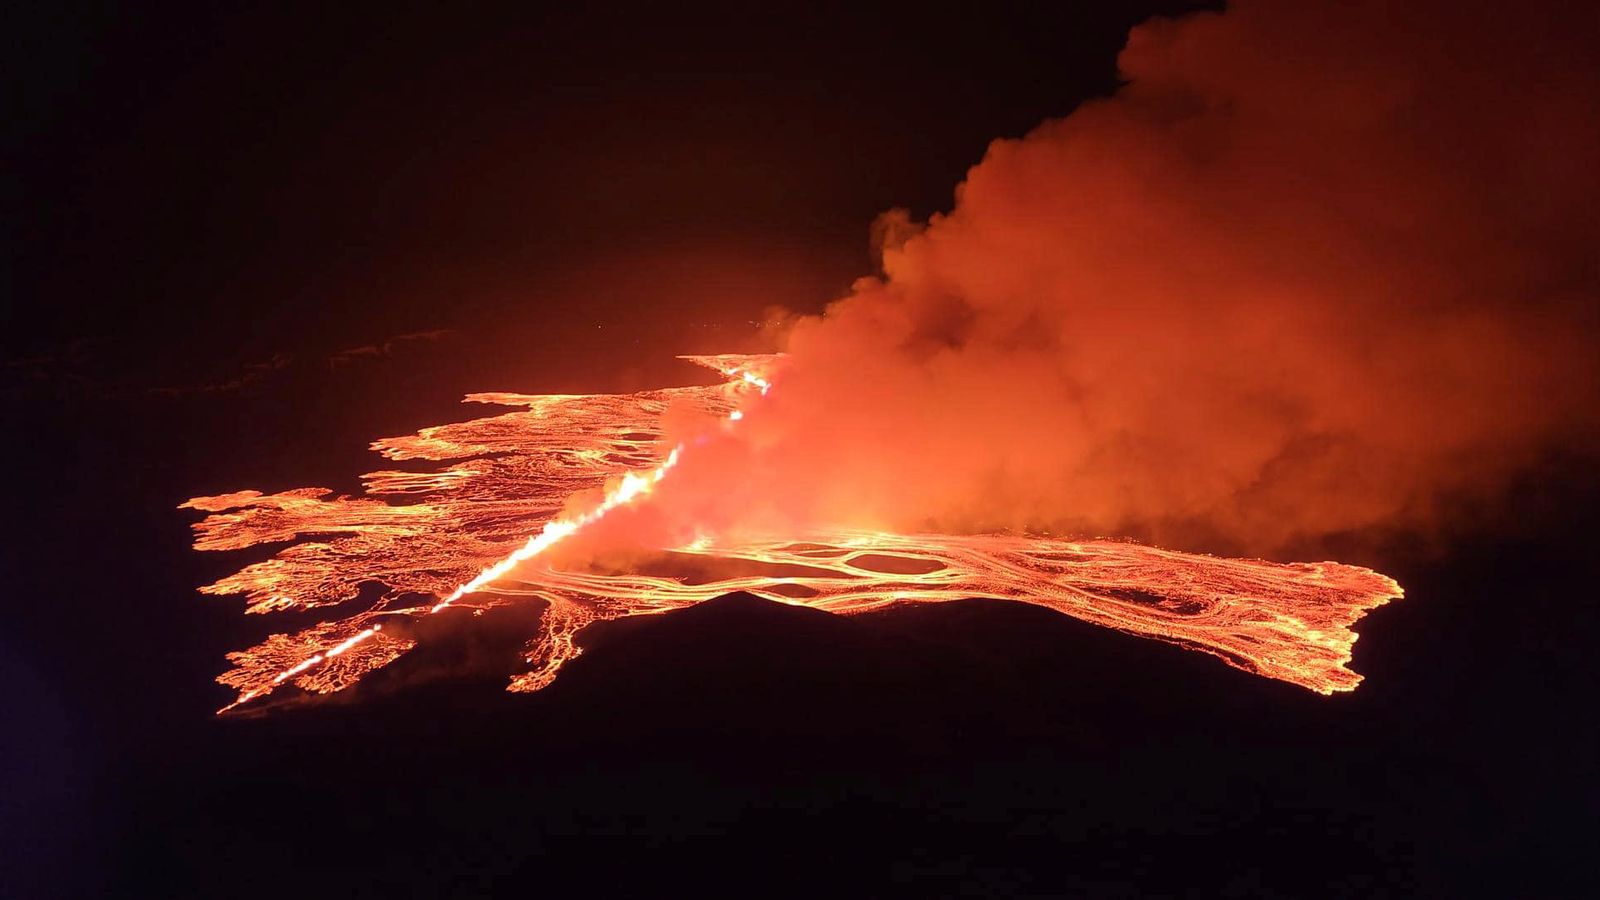 Iceland volcano erupts for fourth time in three months - the 'most powerful so far'